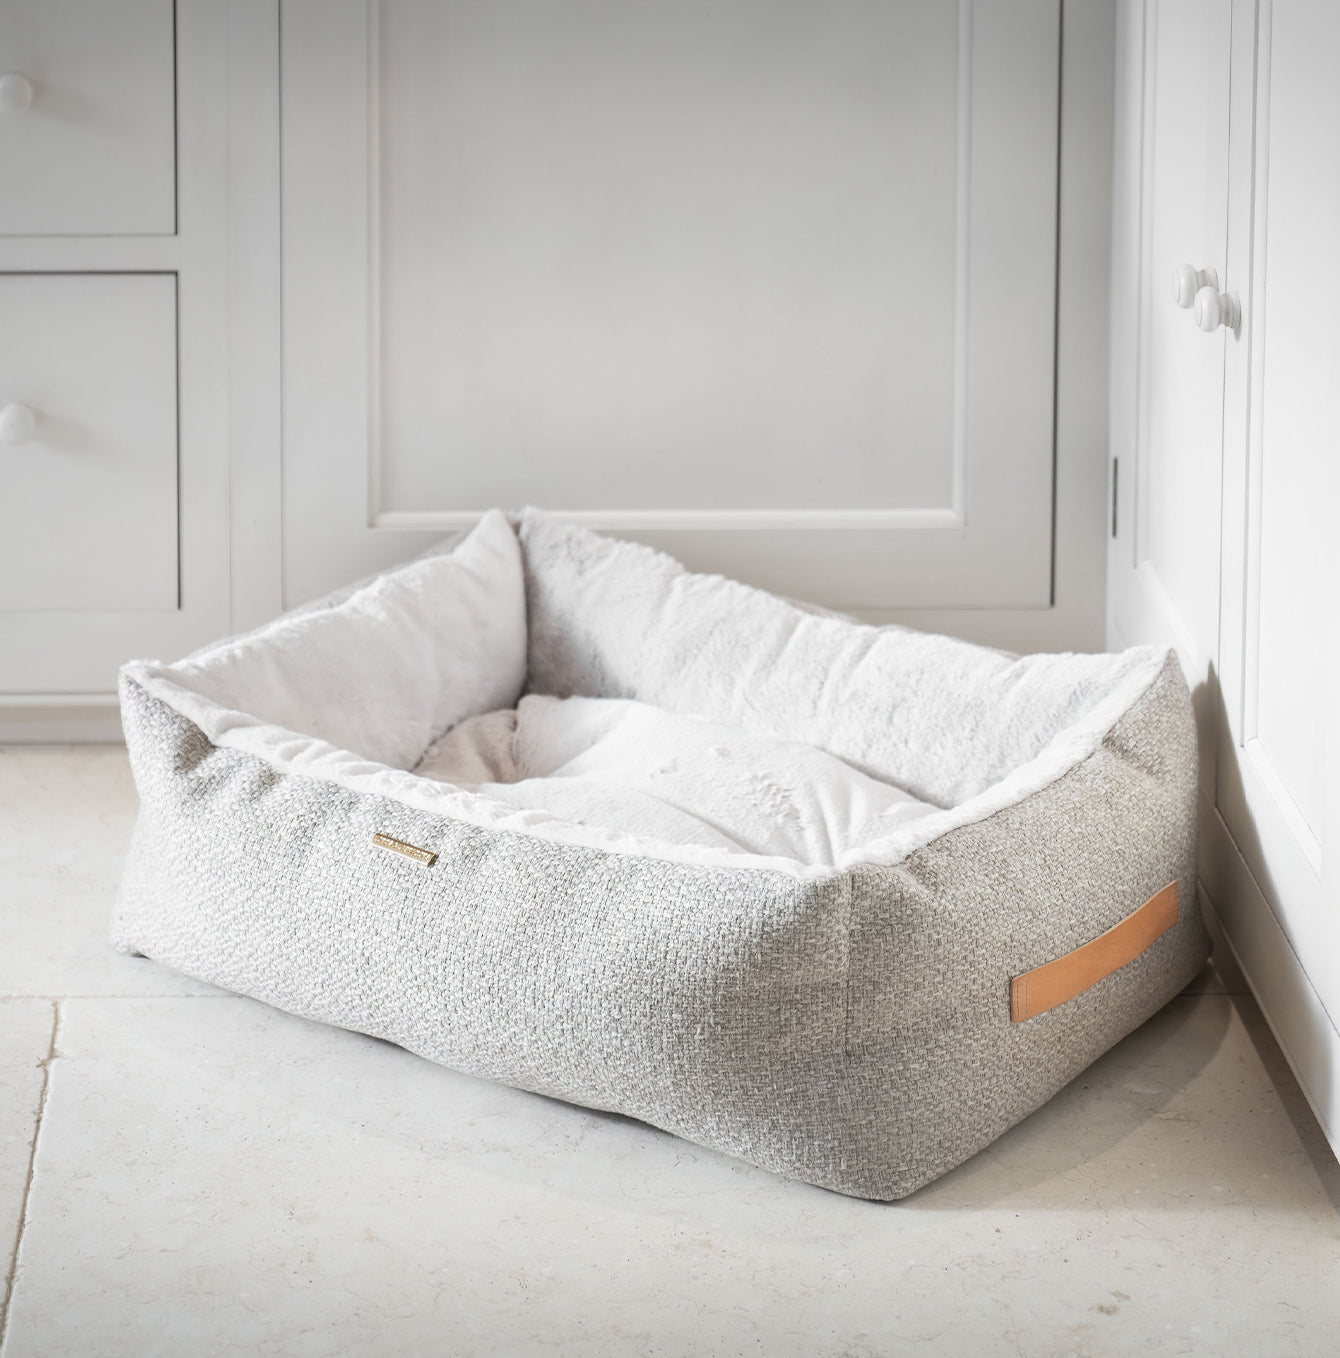 Discover This Luxurious Box Bed For Dogs, Made Using Beautiful Herdwick Fabric To Craft The Perfect Dog Box Bed! In Stunning Sandstone, Available Now at Lords & Labradors US